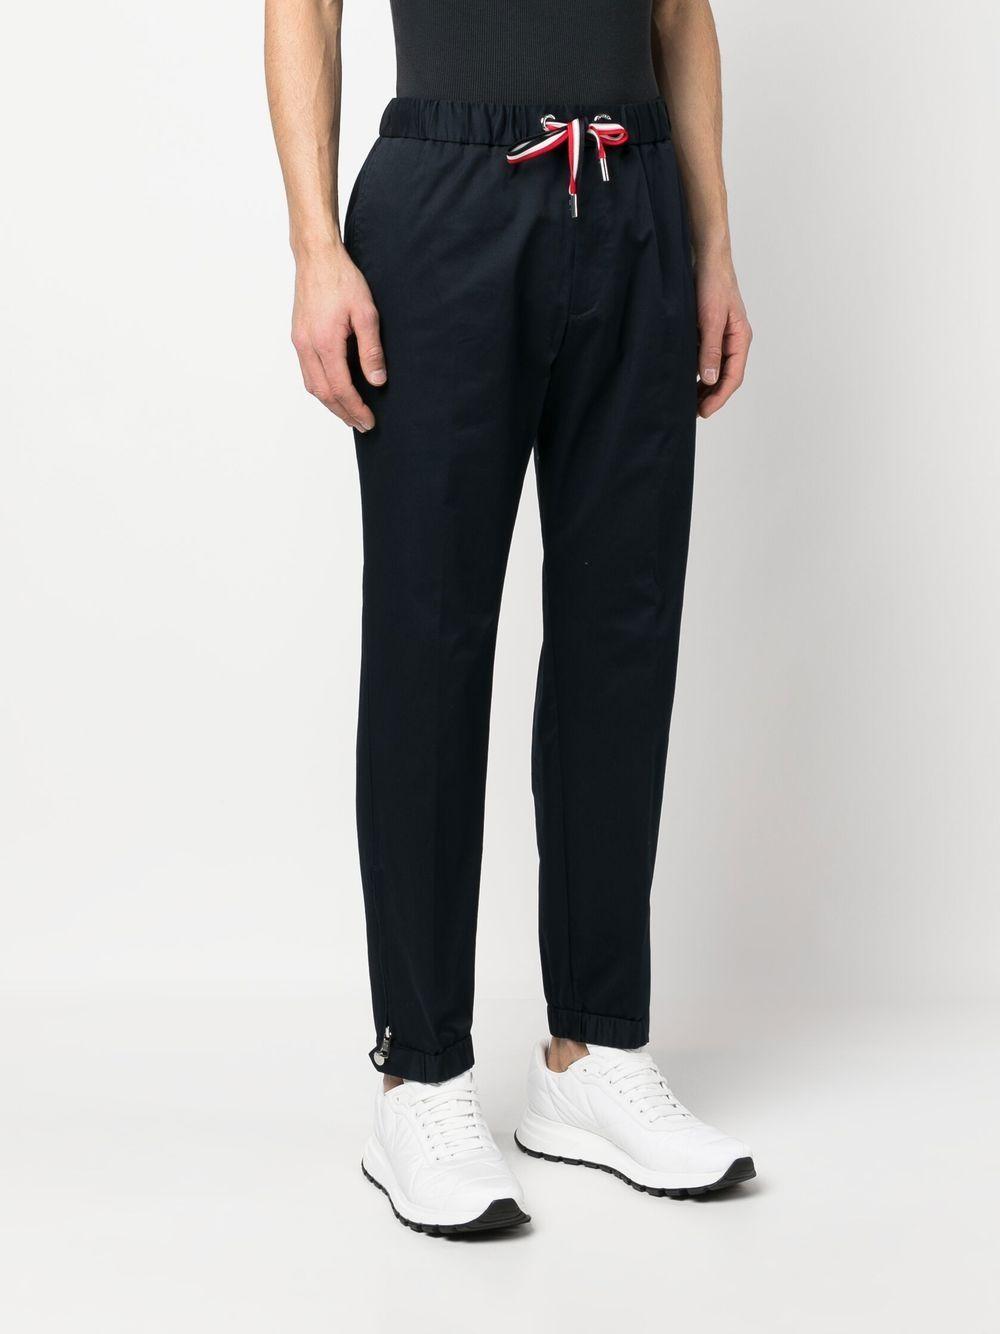 MONCLER Multi-Colored Stylish Trousers for Men - SS23 Collection